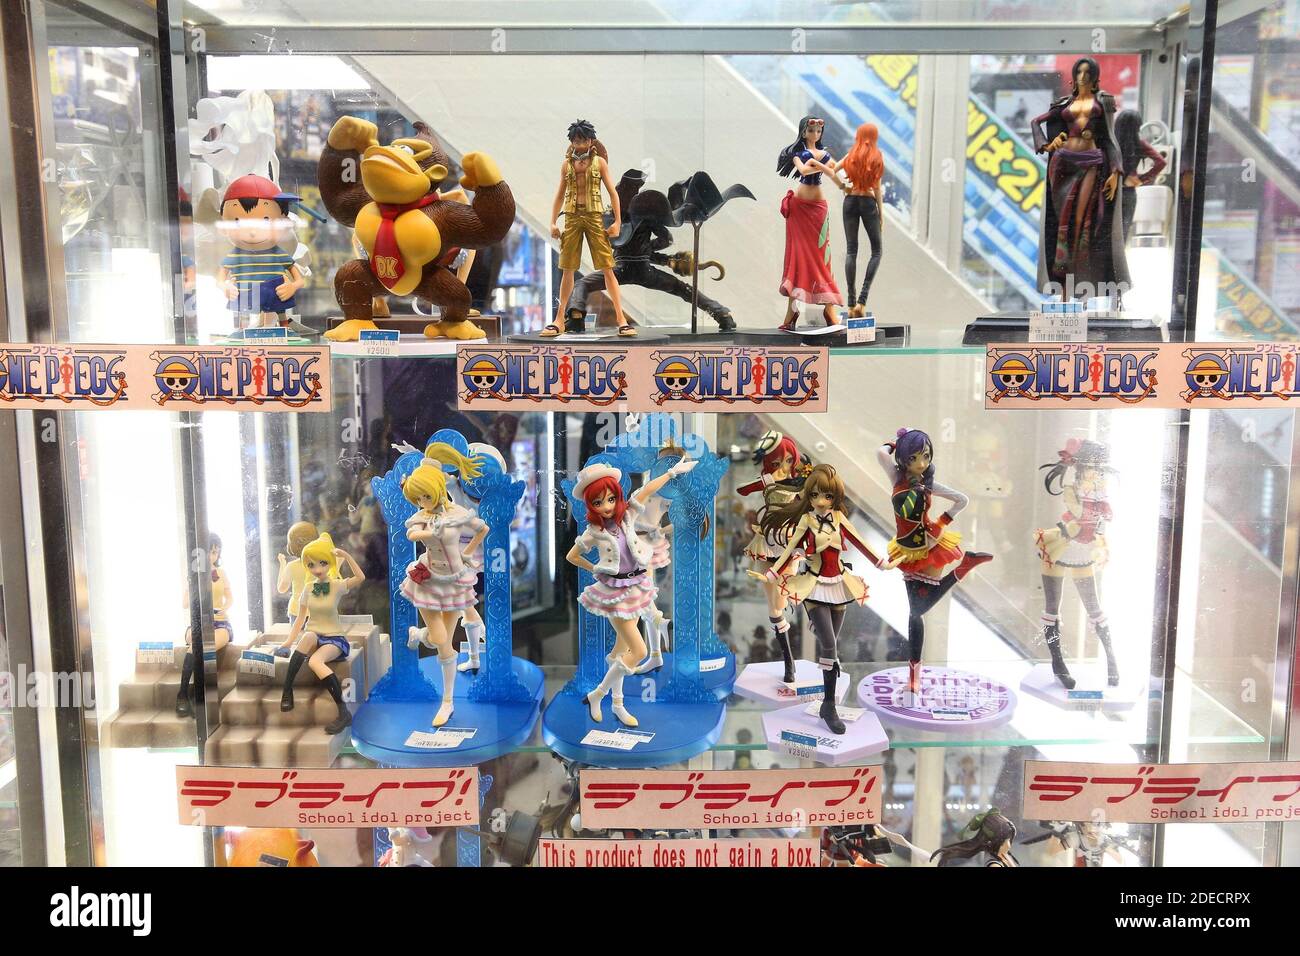 TOKYO, JAPAN - DECEMBER 1, 2016: Gaming toy figurines collectible store in Akihabara district of Tokyo, Japan. Akihabara Electric District specializes Stock Photo